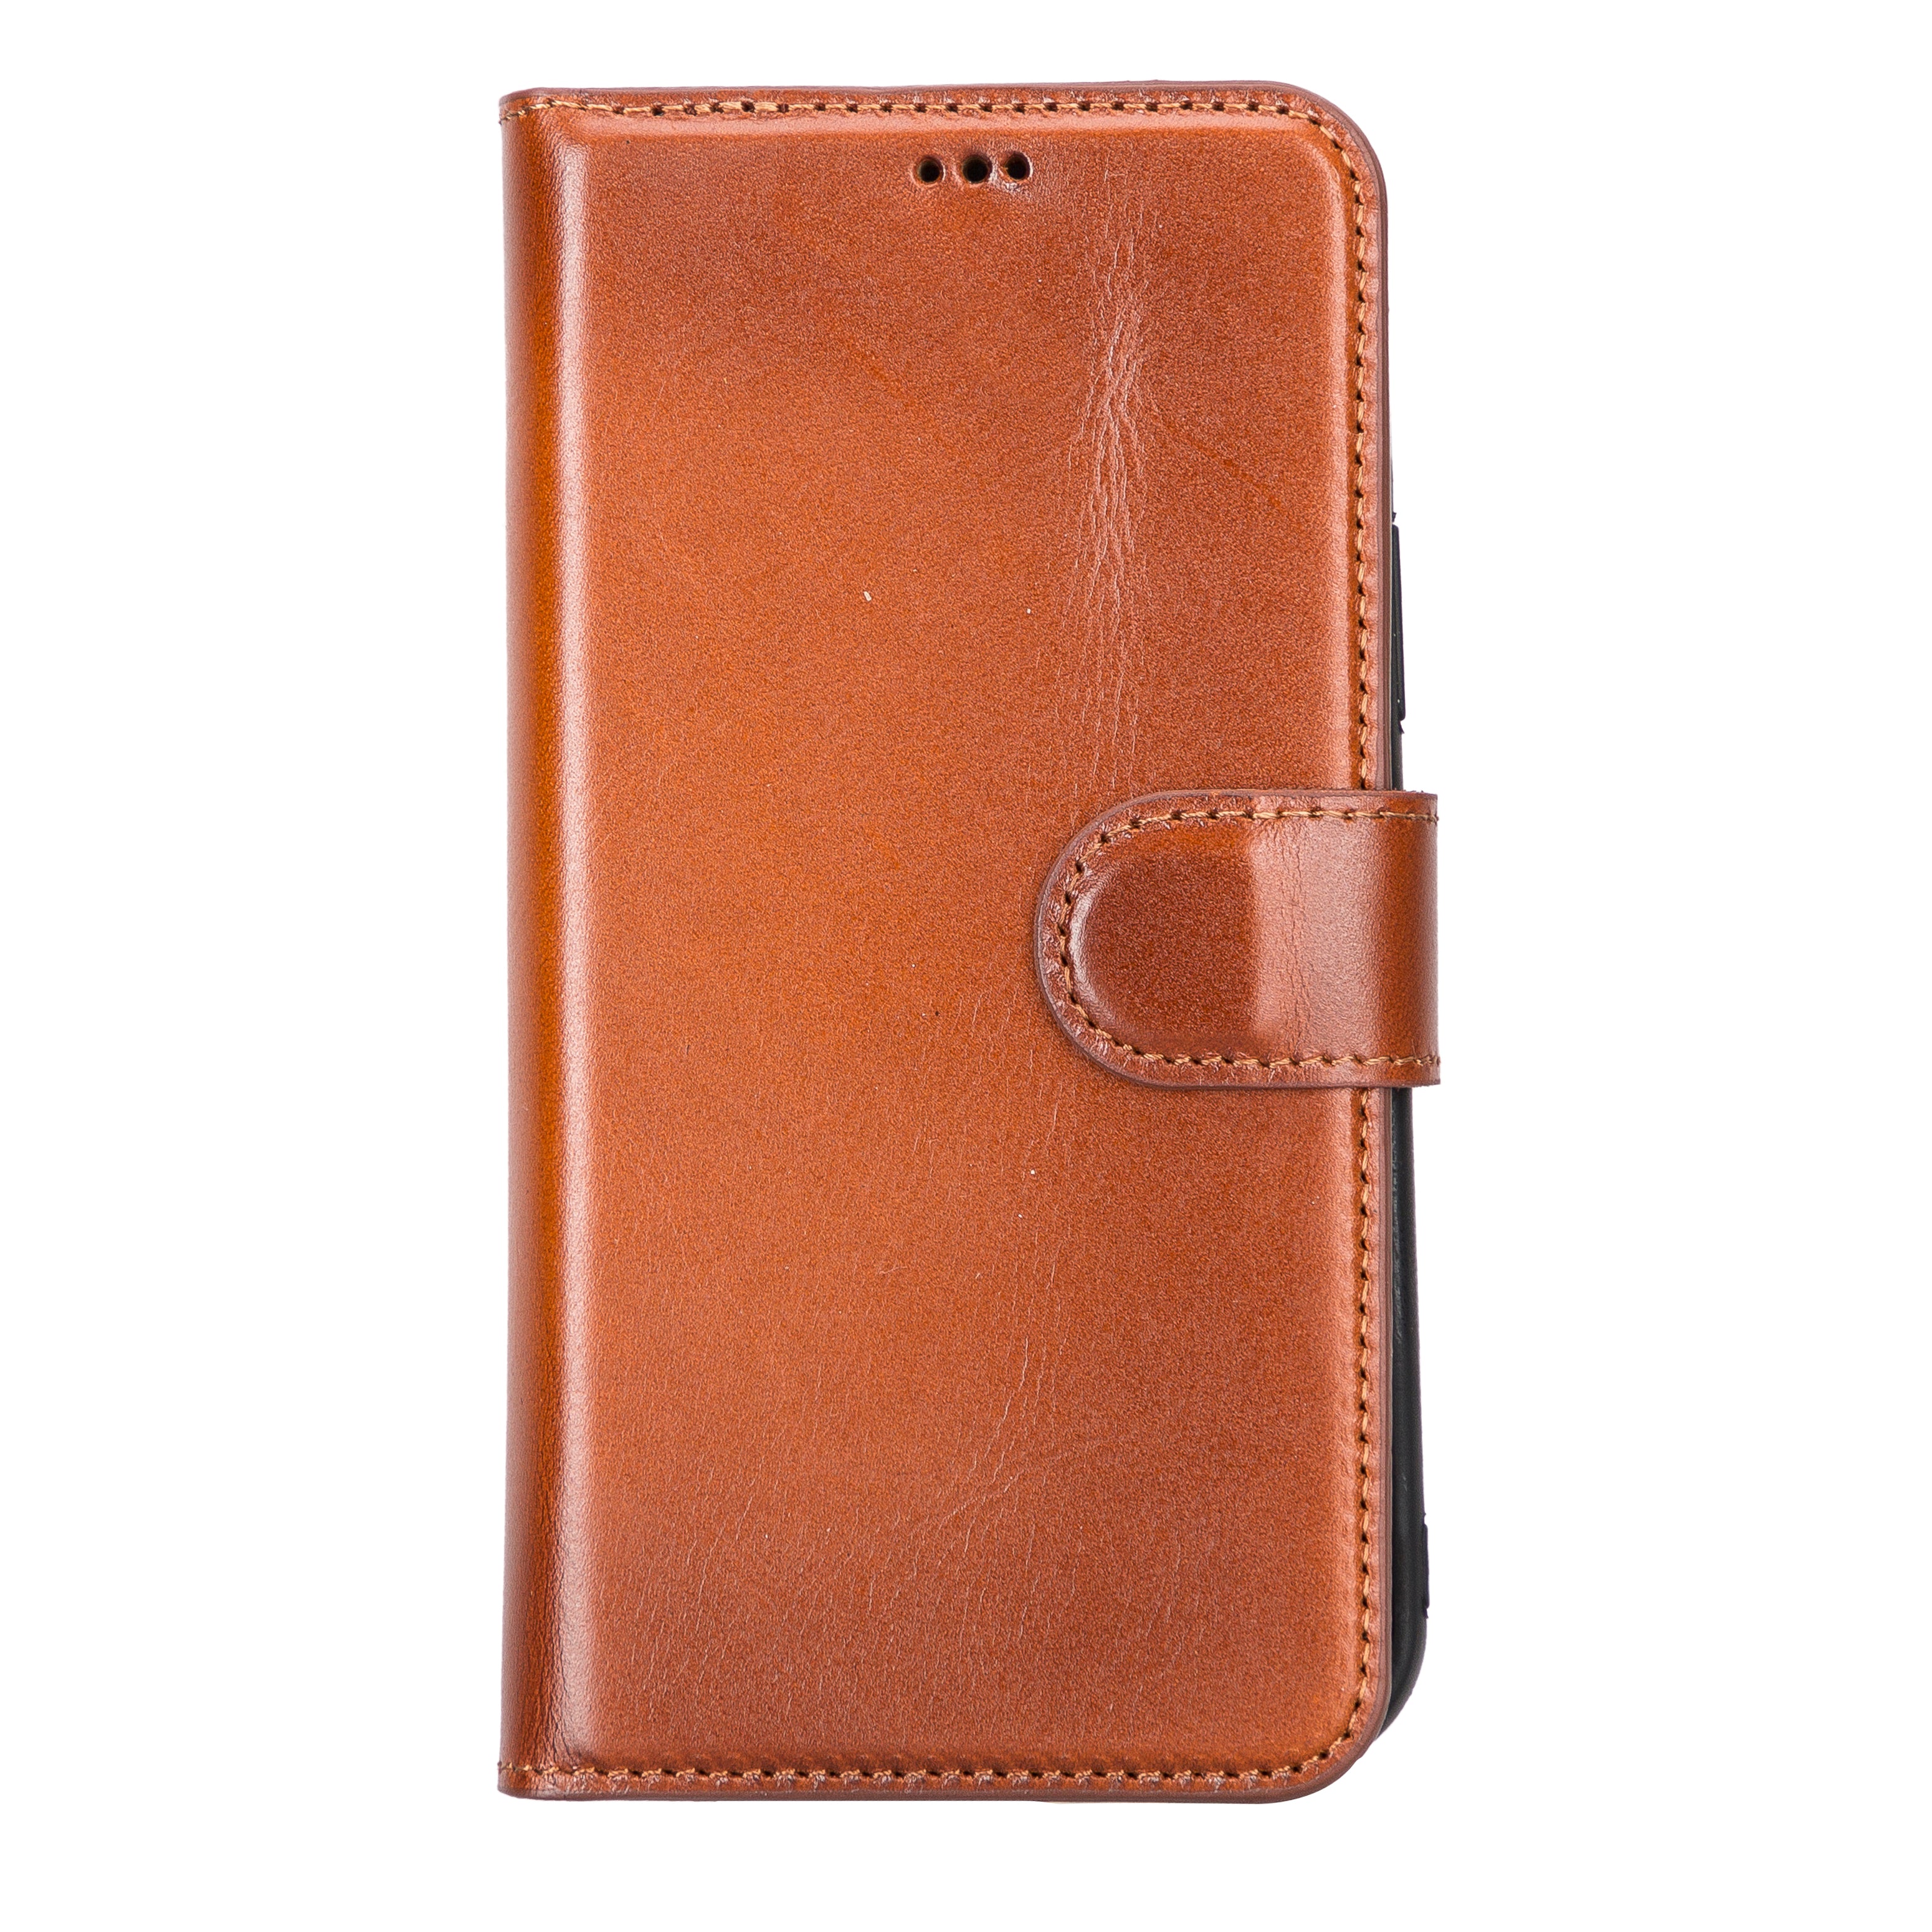 DelfiCase Magnetic Detachable Leather Wallet Case for iPhone 12 and iPhone 12 Pro (6.1") 3